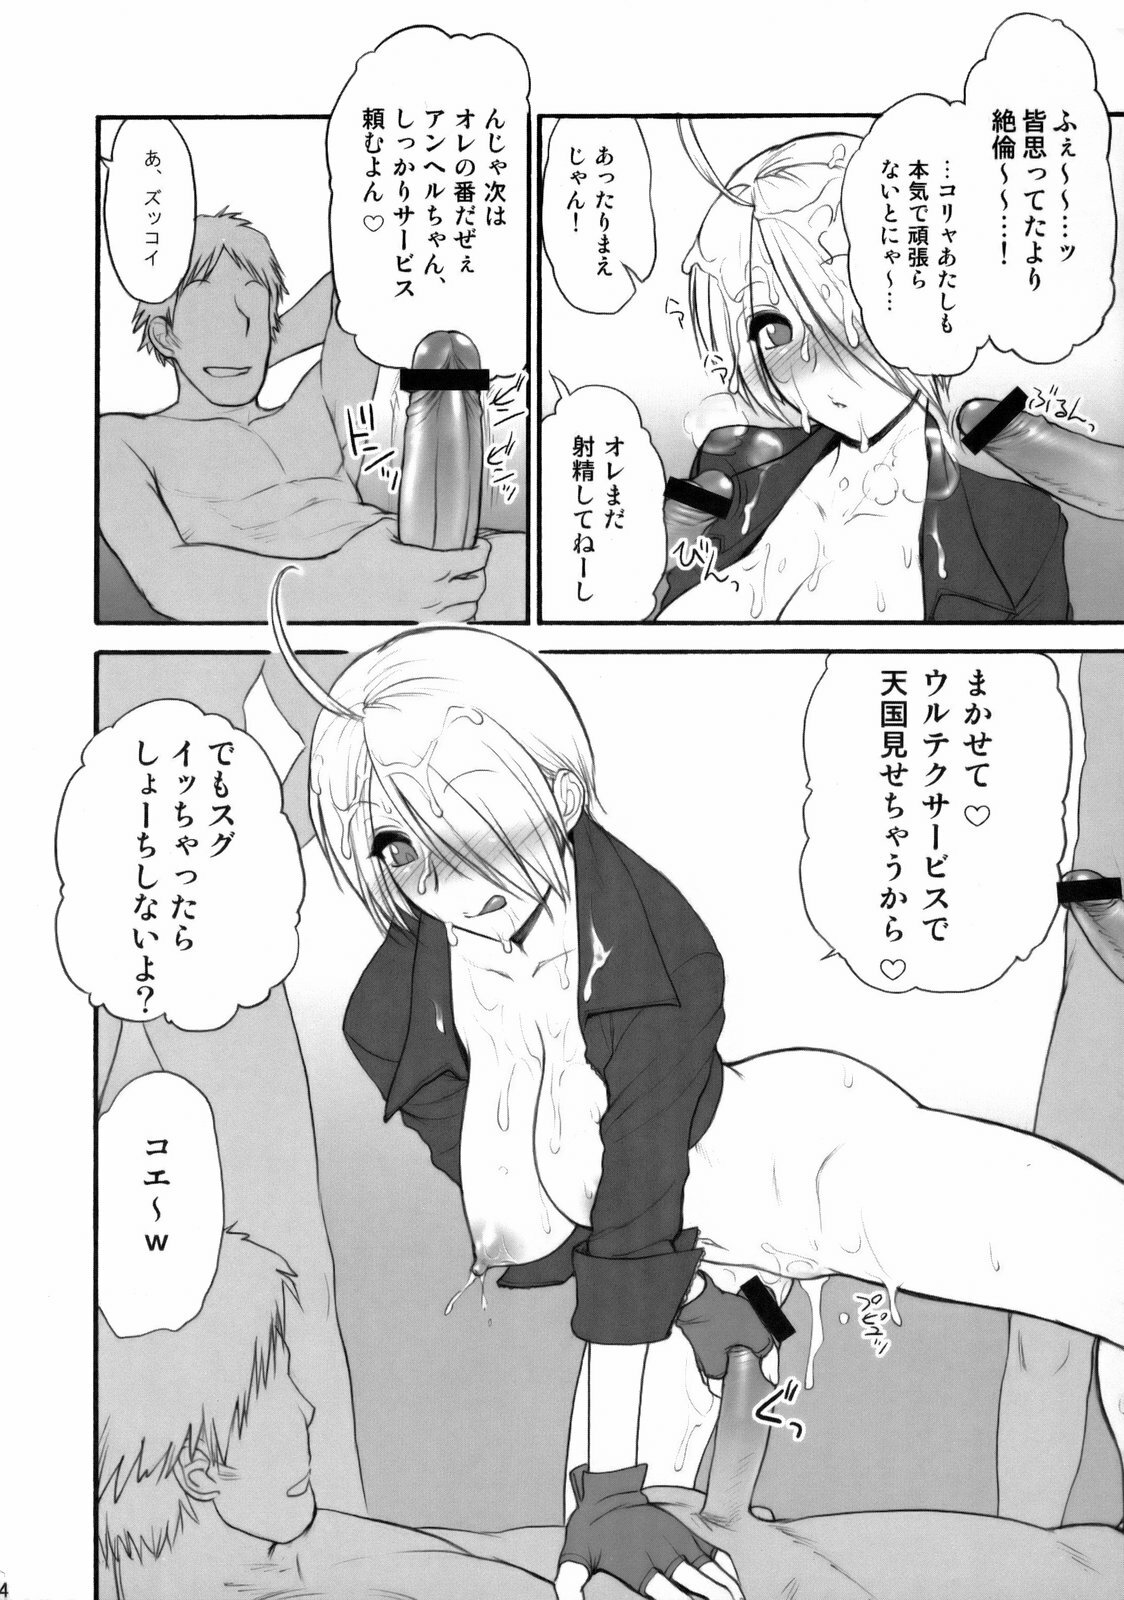 (C75) [Shinnihon Pepsitou (St.germain-sal)] Angel Filled #1.5 (King of Fighters) page 5 full